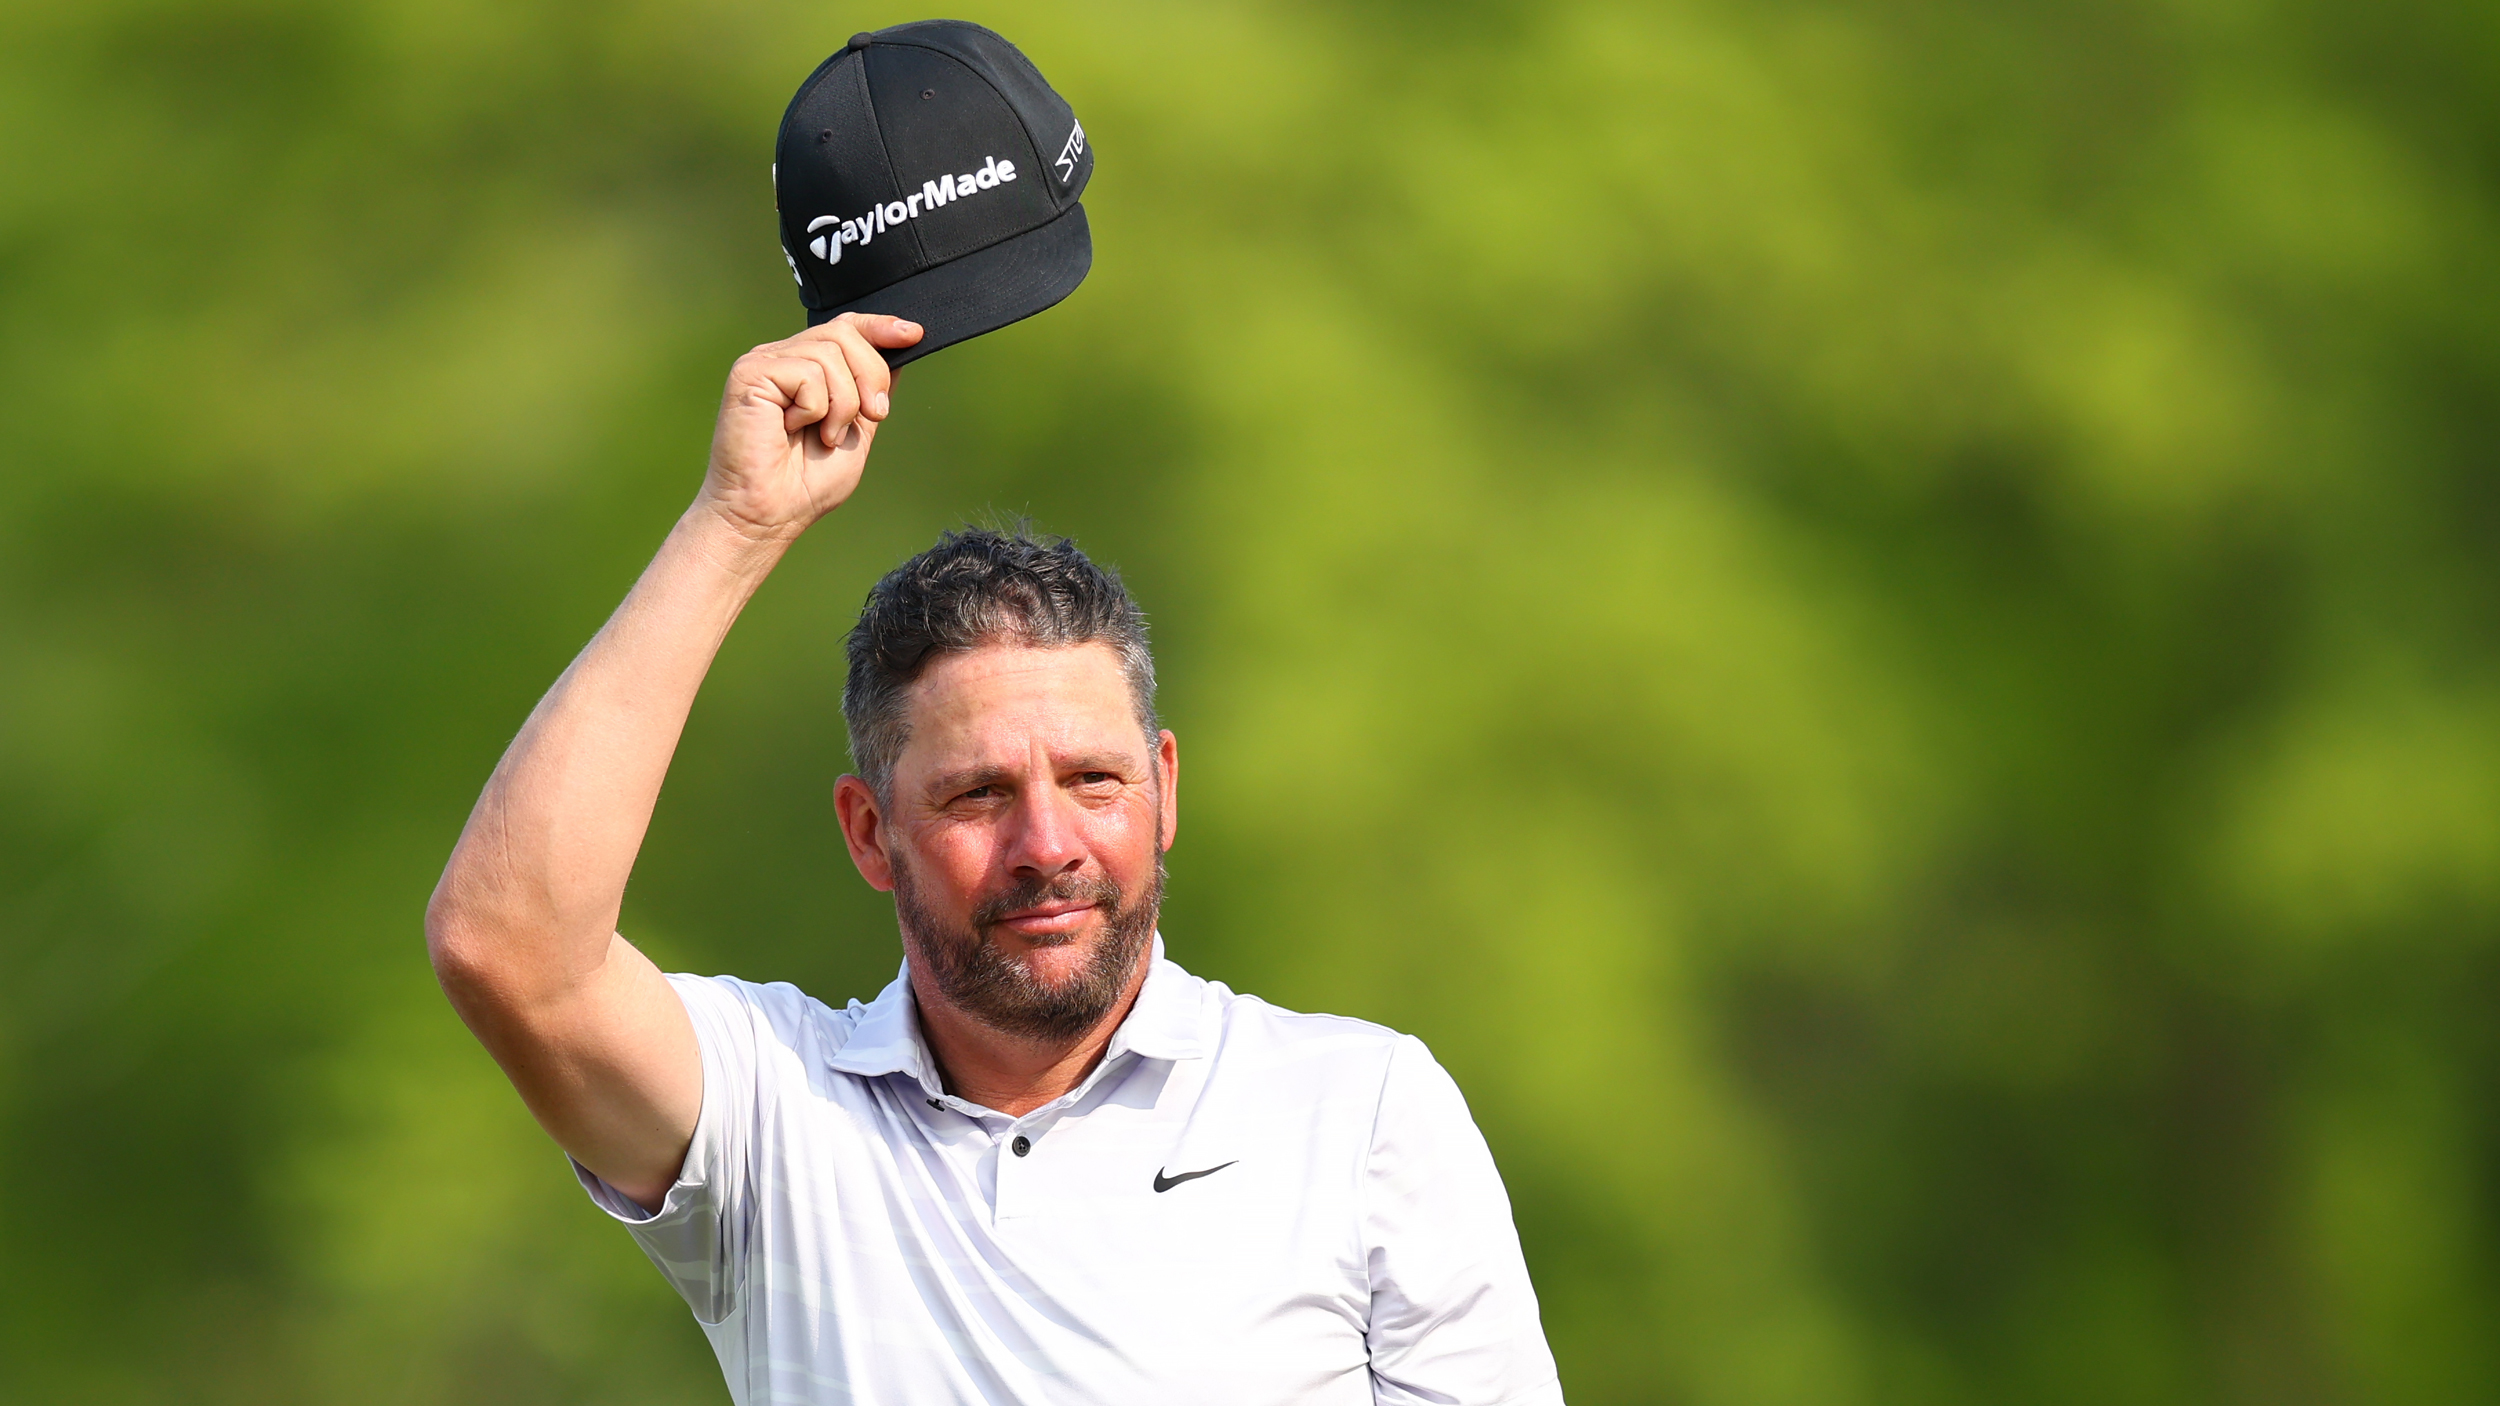 WATCH: Club Pro Michael Block Makes Slam Dunk Hole-In-One At PGA ...